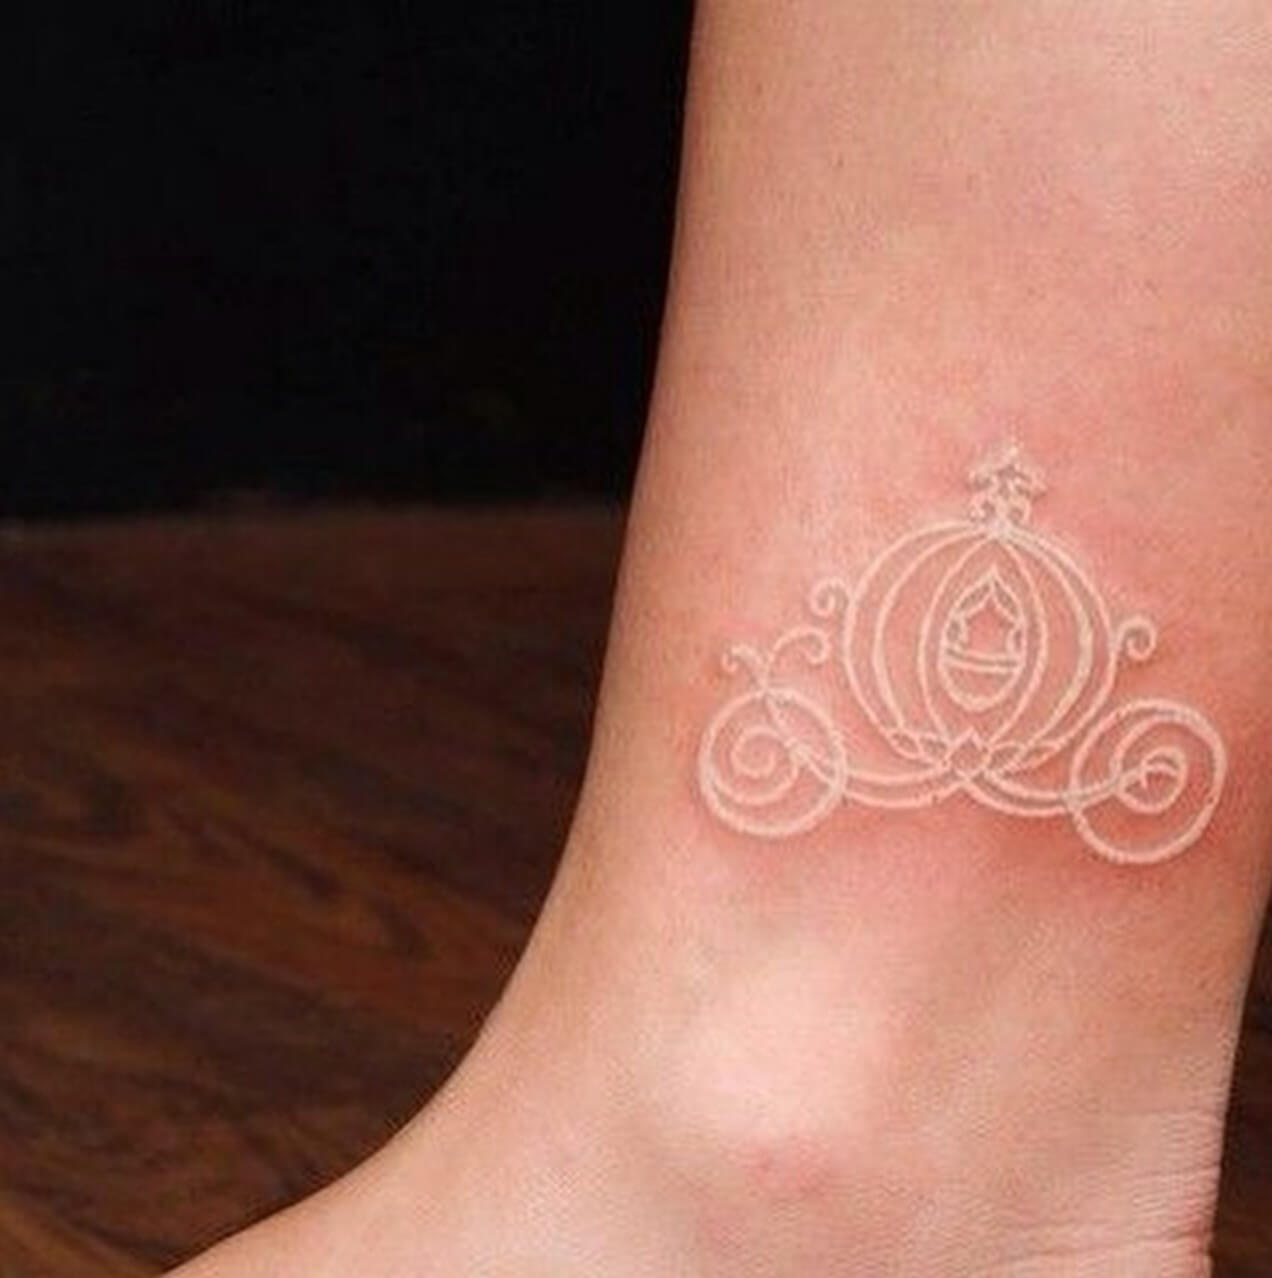 Cinderella carrous tattoo made with white ink